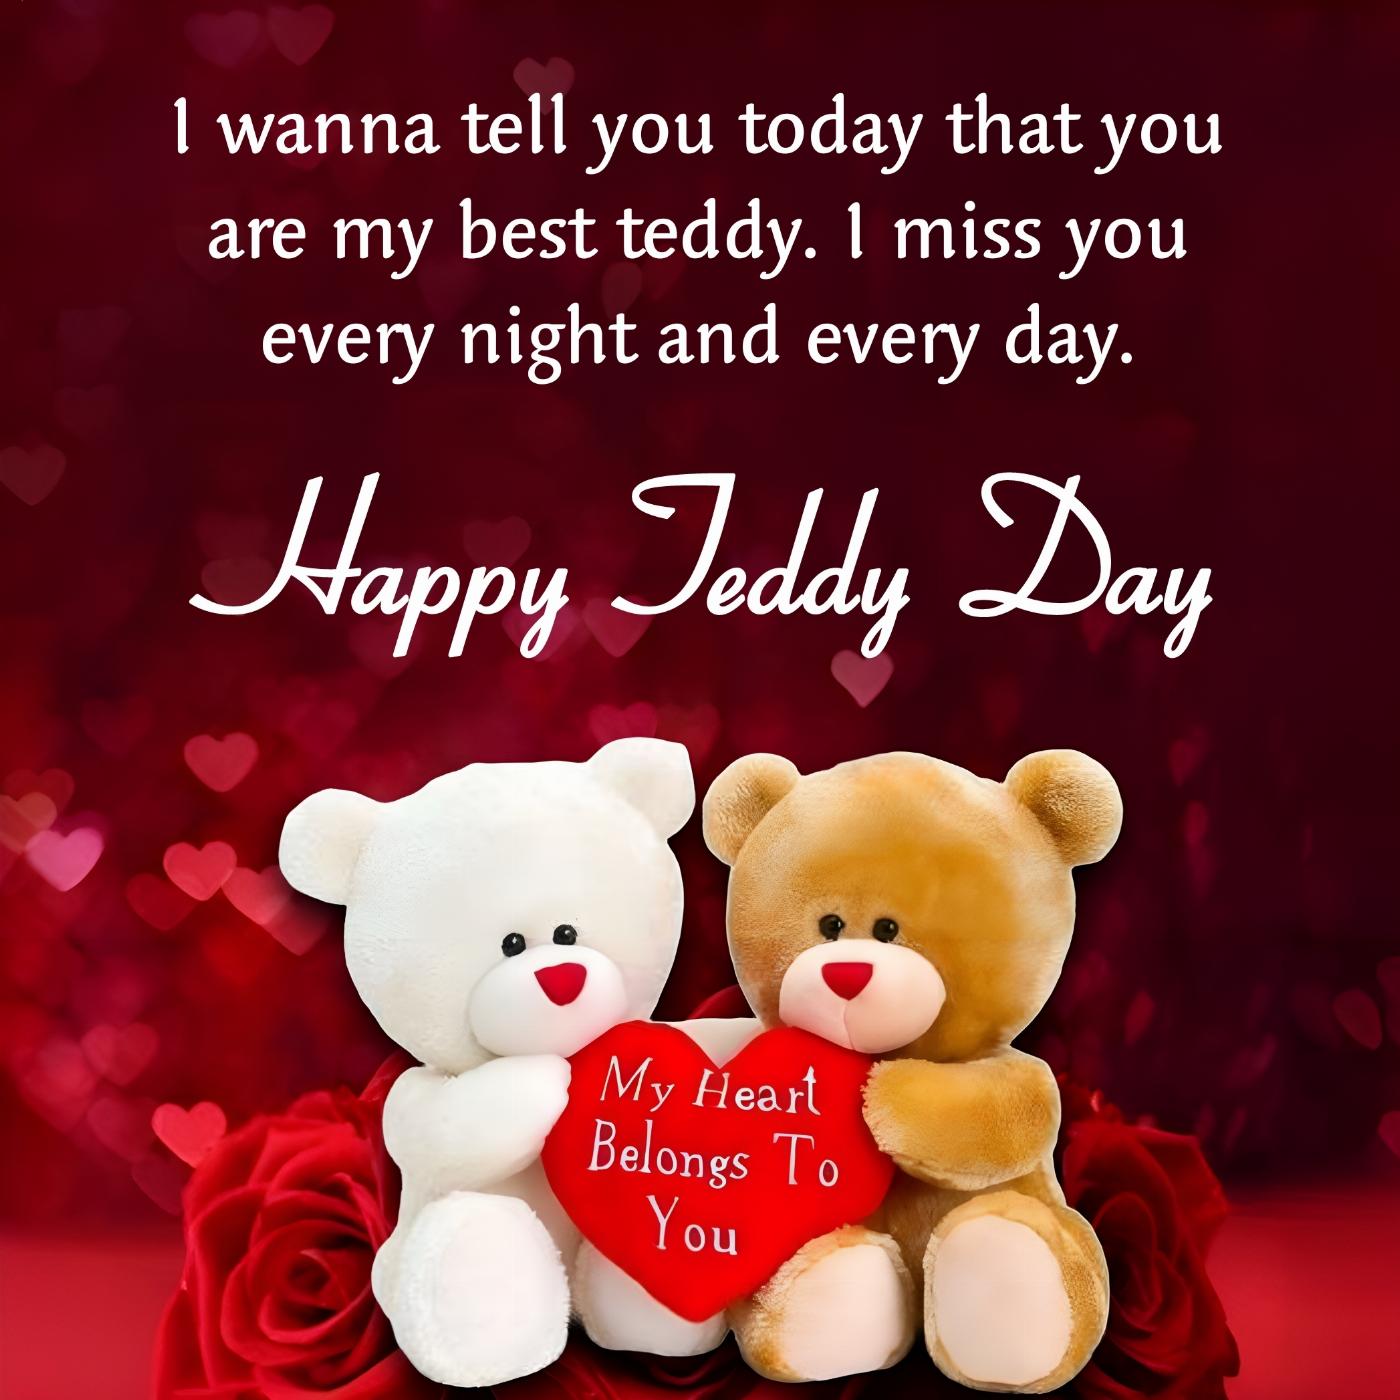 I wanna tell you today that you are my best teddy